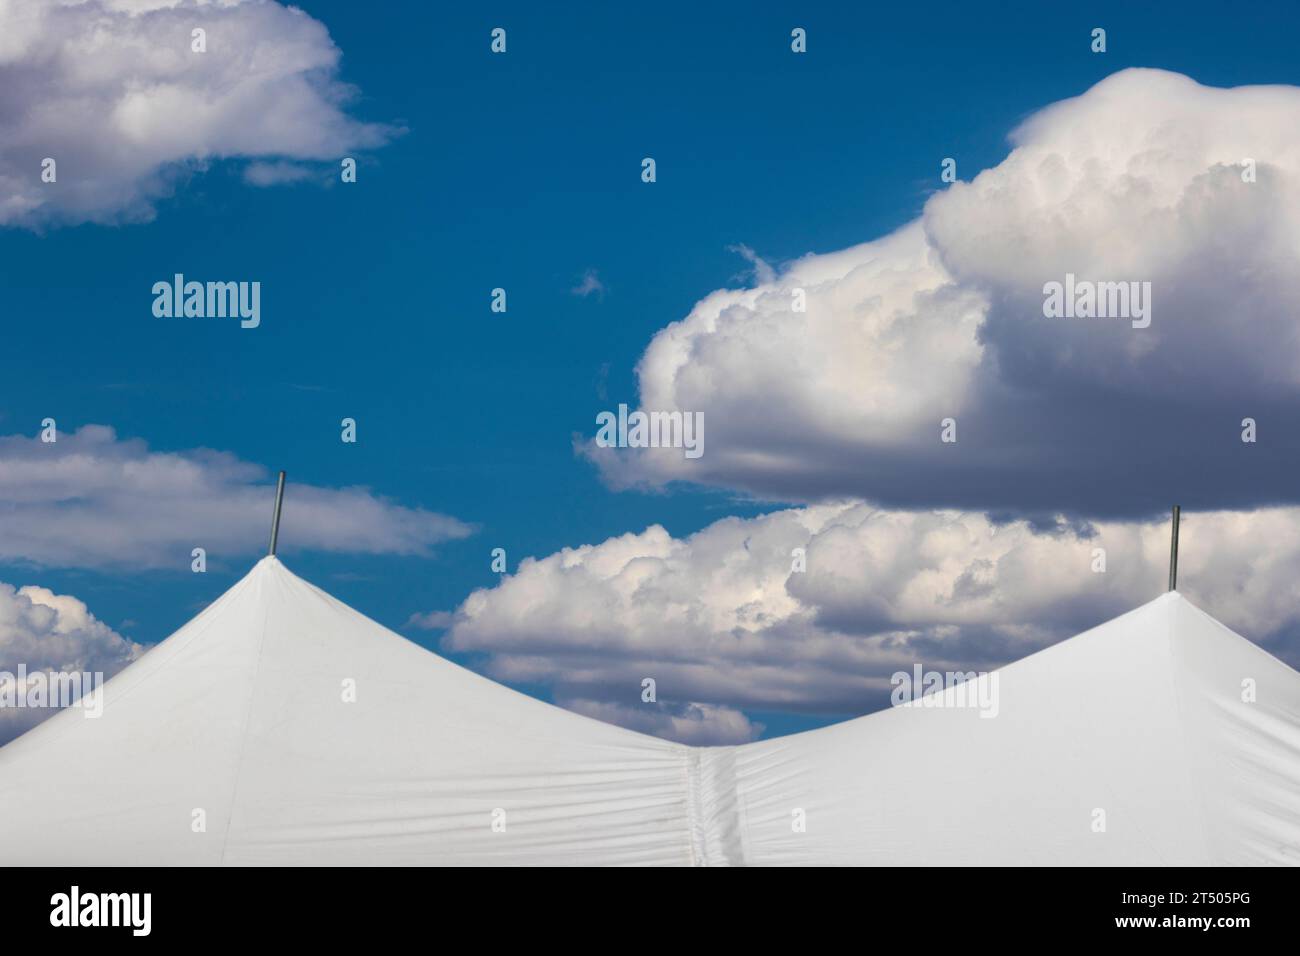 White fluffly clouds in bright blue sky hoover over the tops of a white tent. Stock Photo